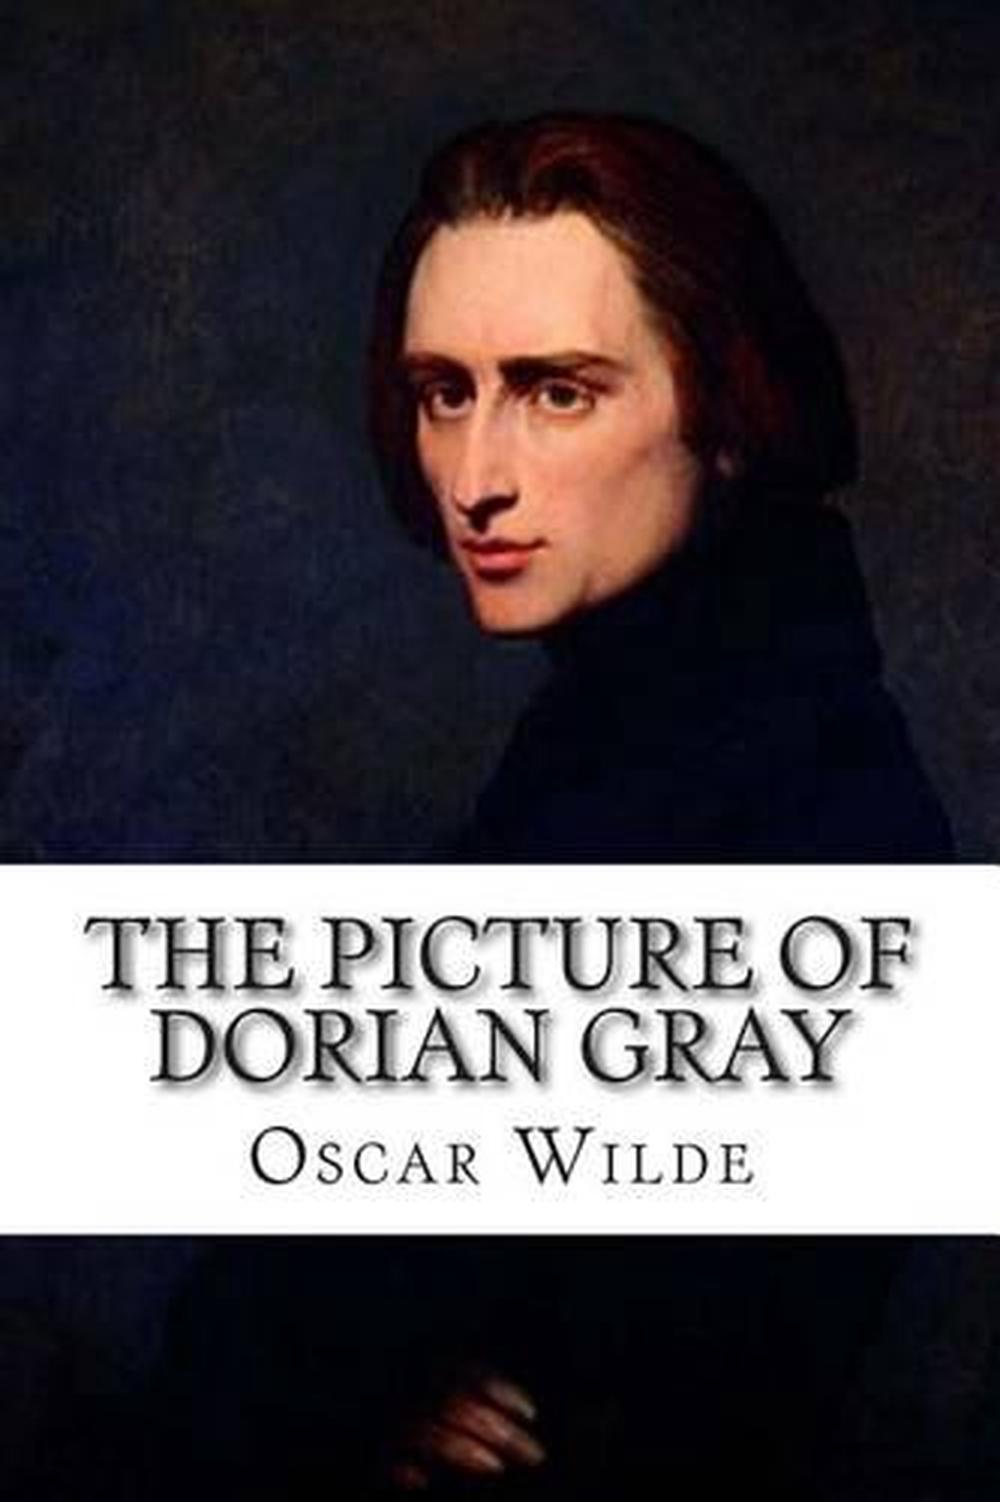 The Picture of Dorian Gray by Oscar Wilde (English) Paperback Book Free